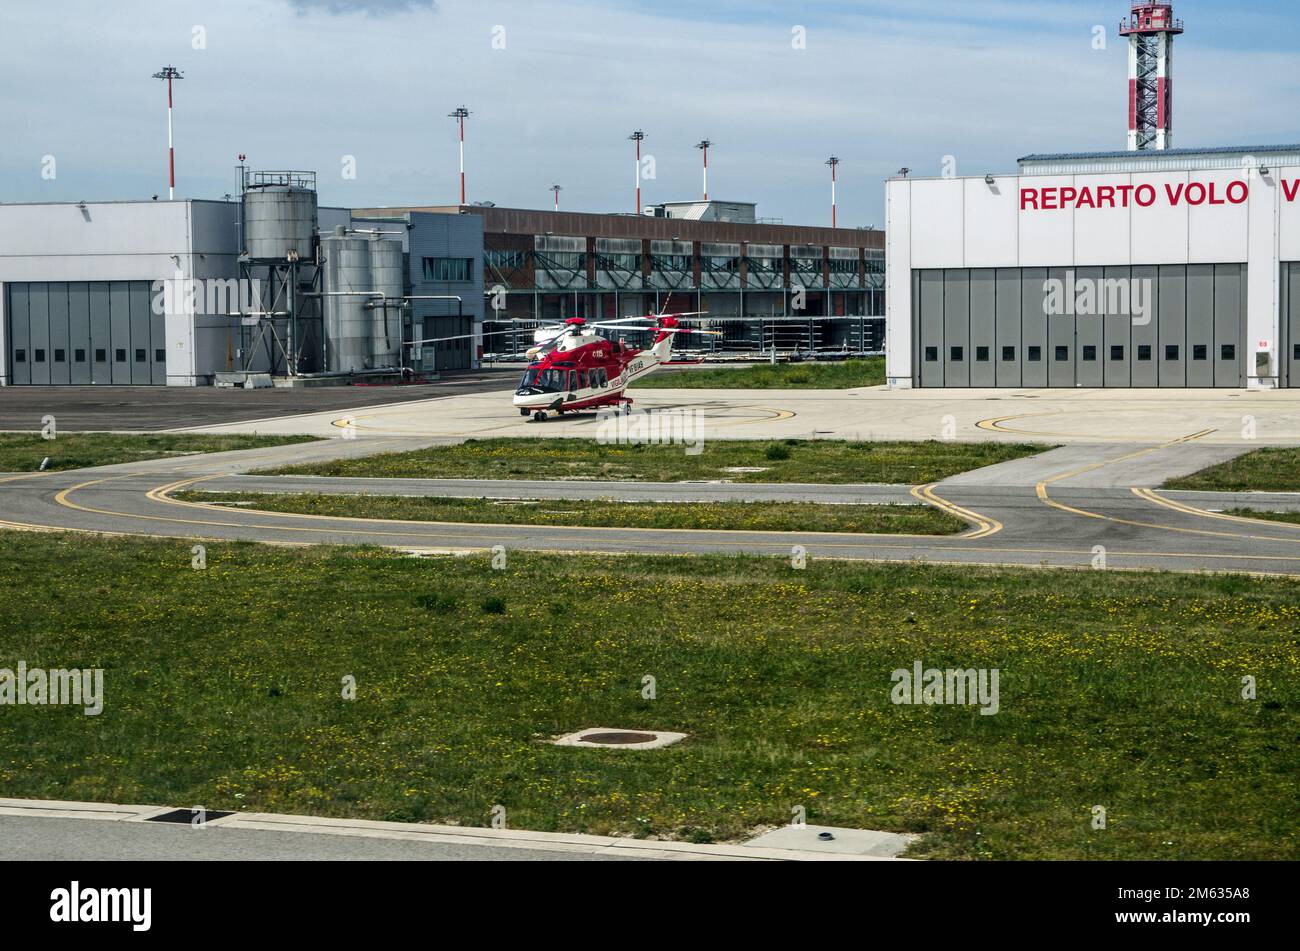 Venice, Italy - April 19, 2-22: A helicopter used by the emergency services on an apron at Marco Polo Airport on a sunny morning in Venice. Stock Photo